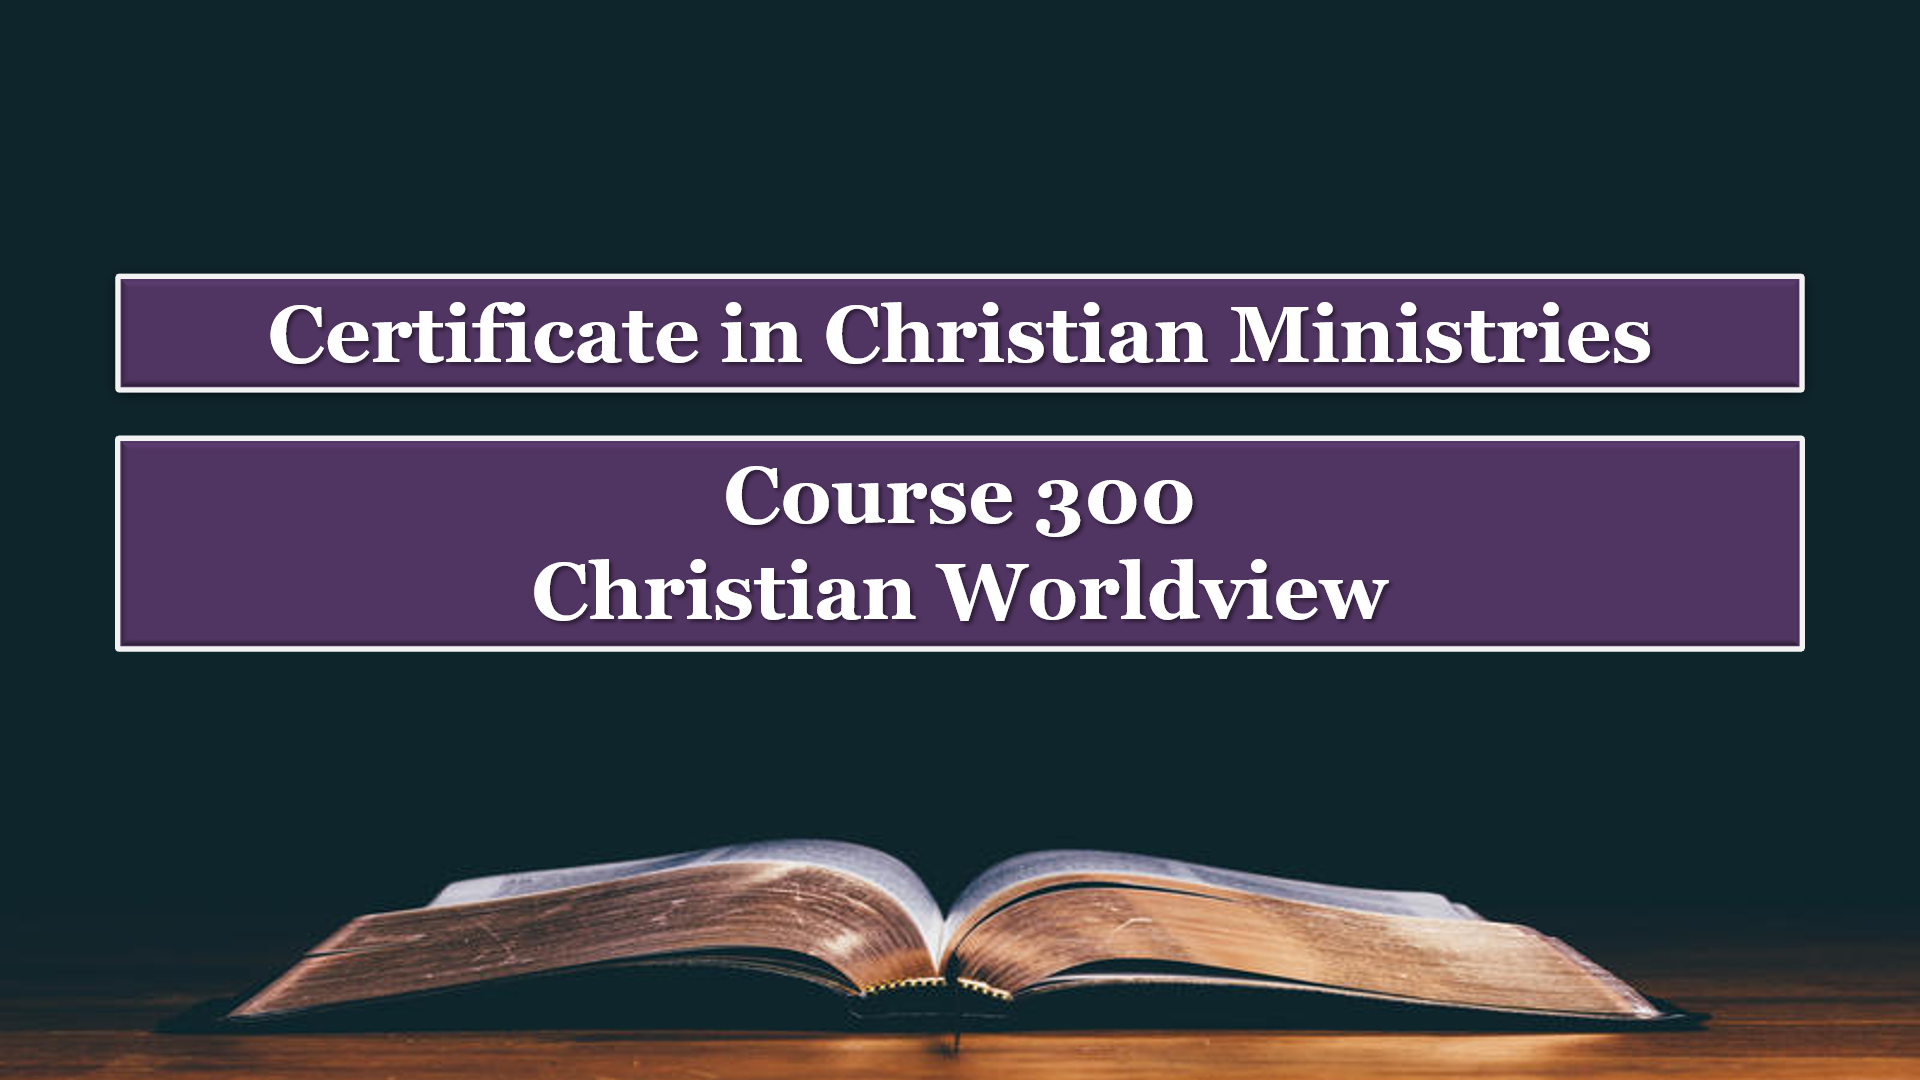 Course 300: Christian Worldview